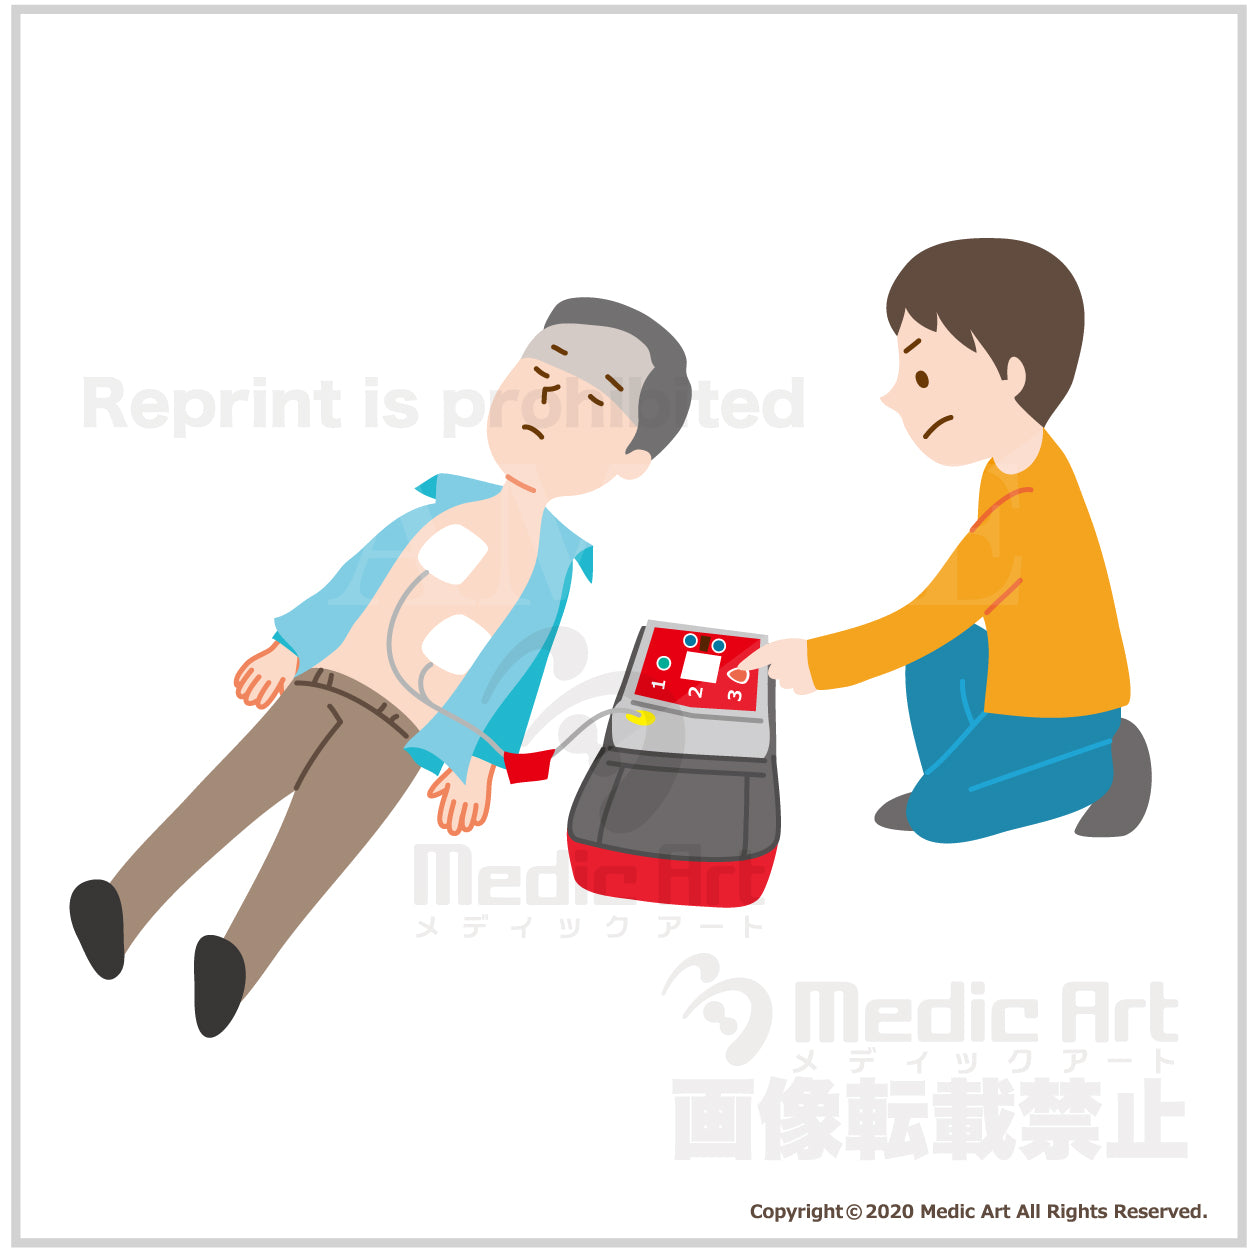 First Aid using the AED (automated external defibrillator) : Cardiopulmonary resuscitation 3